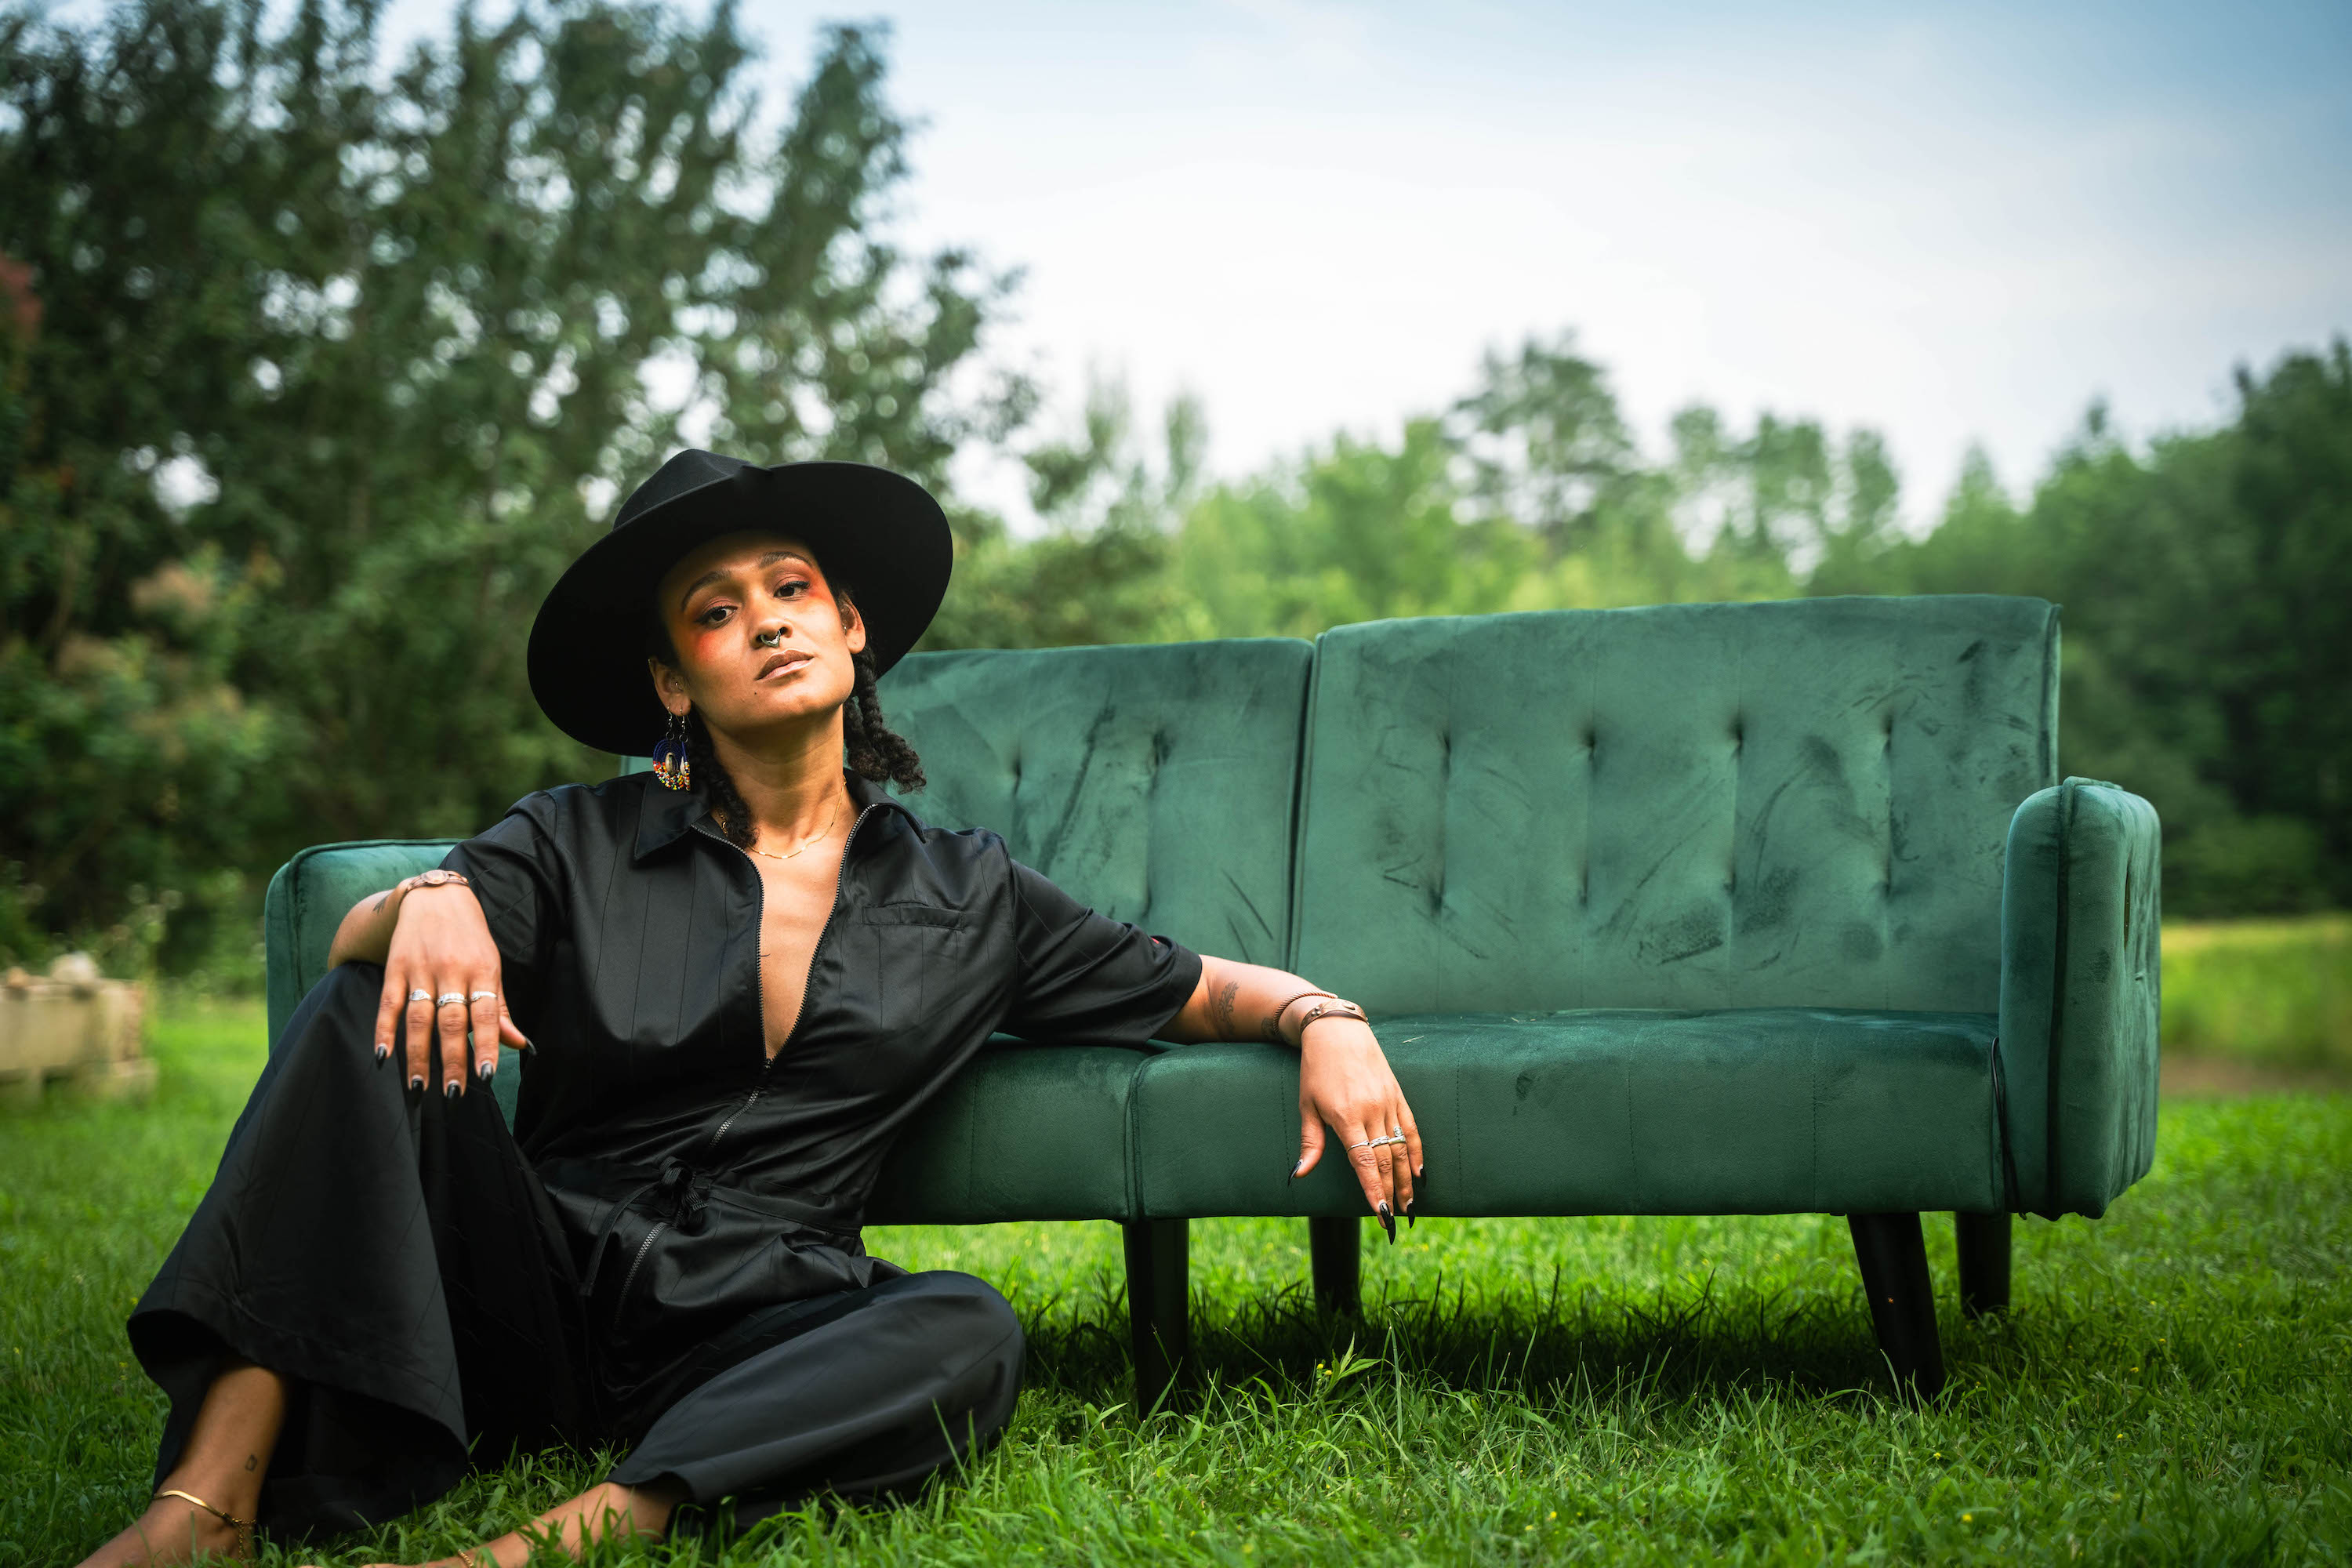 Eleanor is wearing a black jumpsuit and wide-brim black hat. They are sitting on a large lawn and leaning against a green velvet couch. Their left arm is resting on their knee.